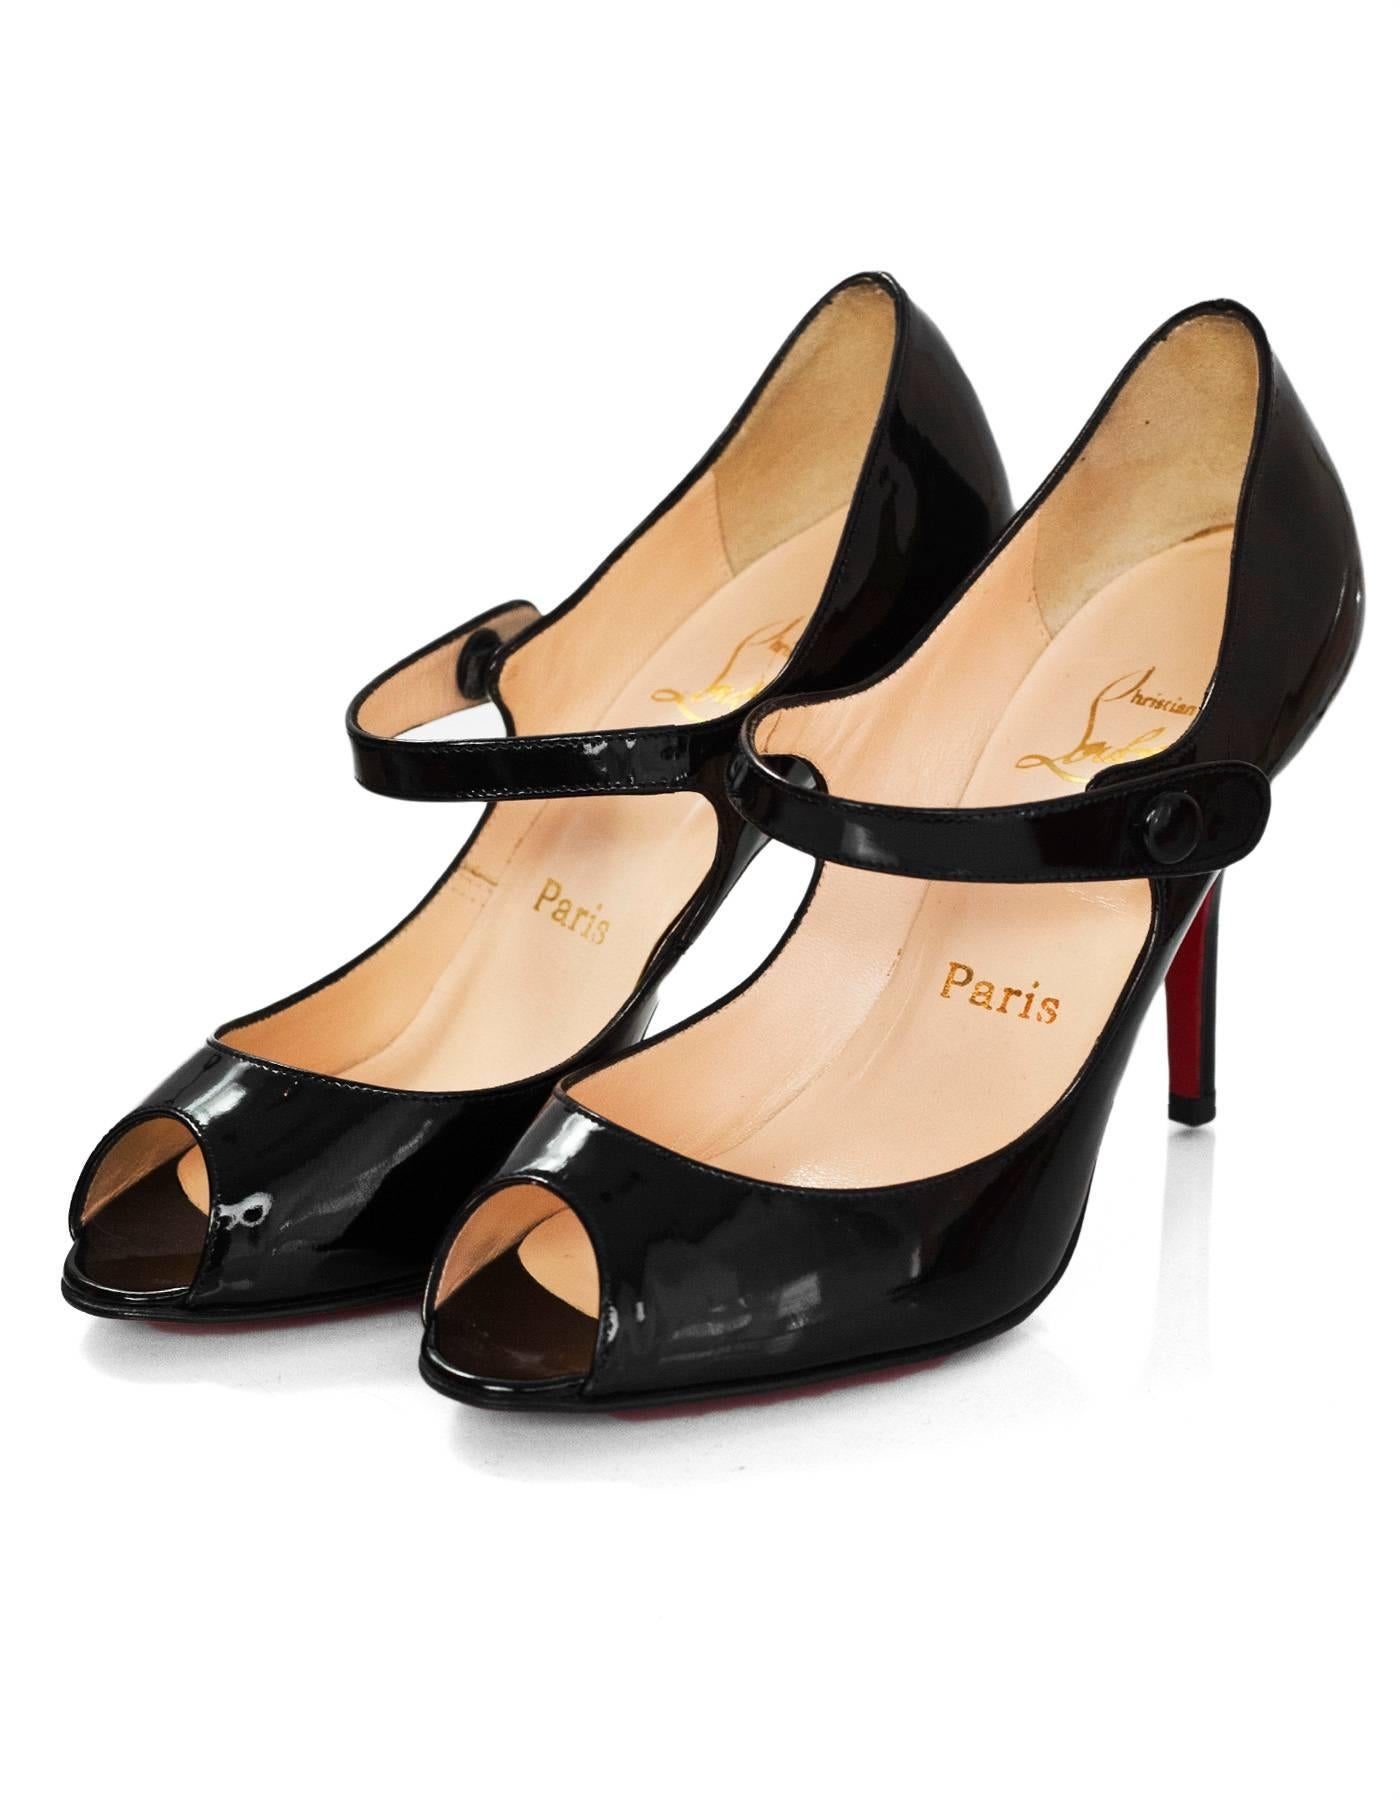 Christian Louboutin Black Patent Peep-Toe Mary Jane Pumps Sz 35.5

Made In: Italy
Color: Black
Materials: Patent leather
Closure/Opening: Pull-on
Sole Stamp: Christian Louboutin vero cuoio Made in Italy 35.5
Overall Condition: Excellent pre-owned